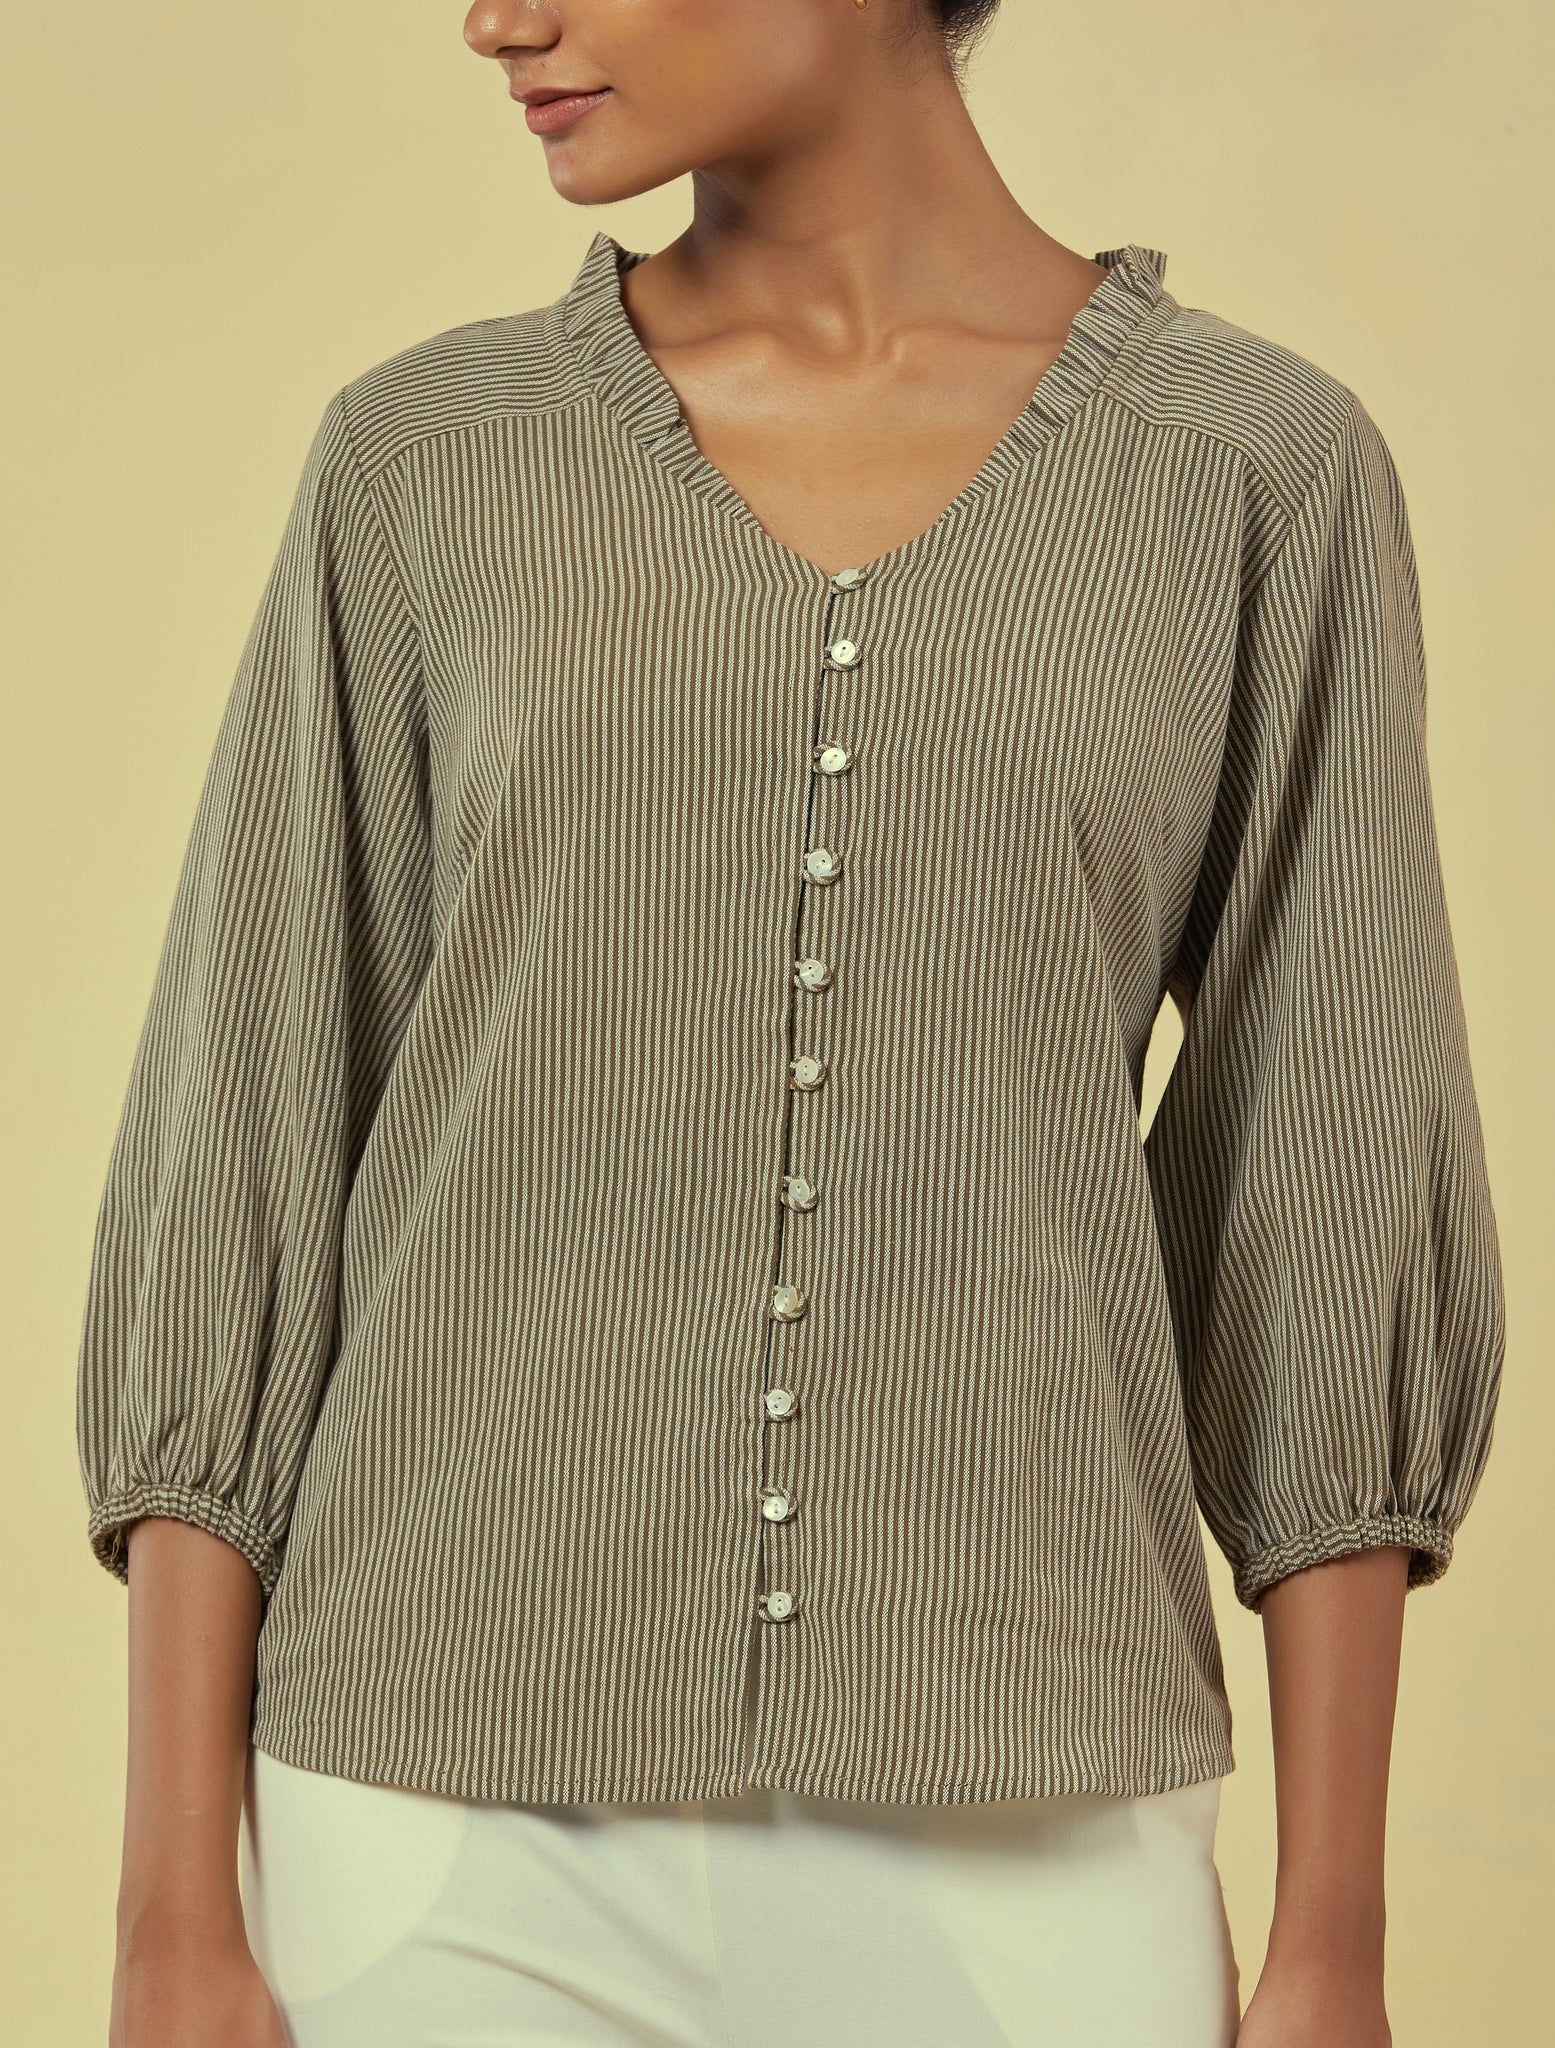 Maya Olive Green Handwoven Striped Top